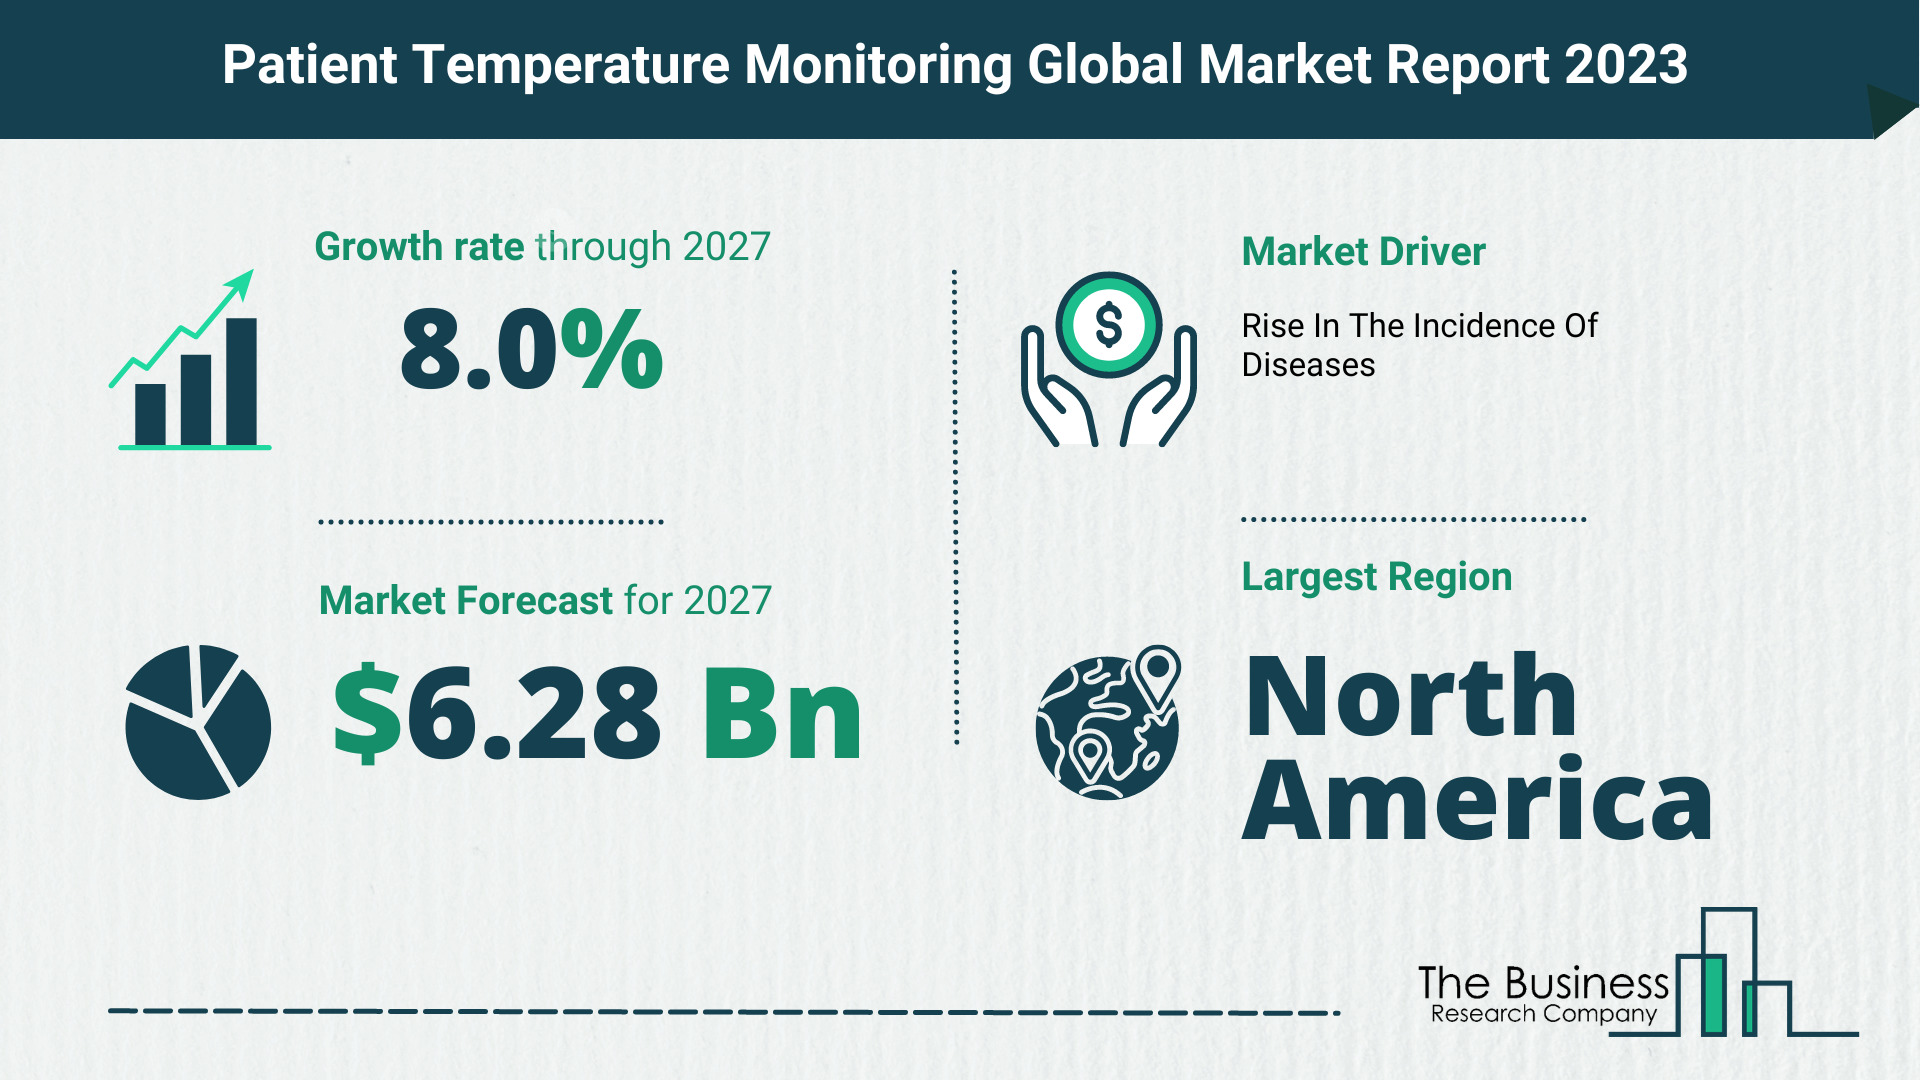 What Will The Patient Temperature Monitoring Market Look Like In 2023?